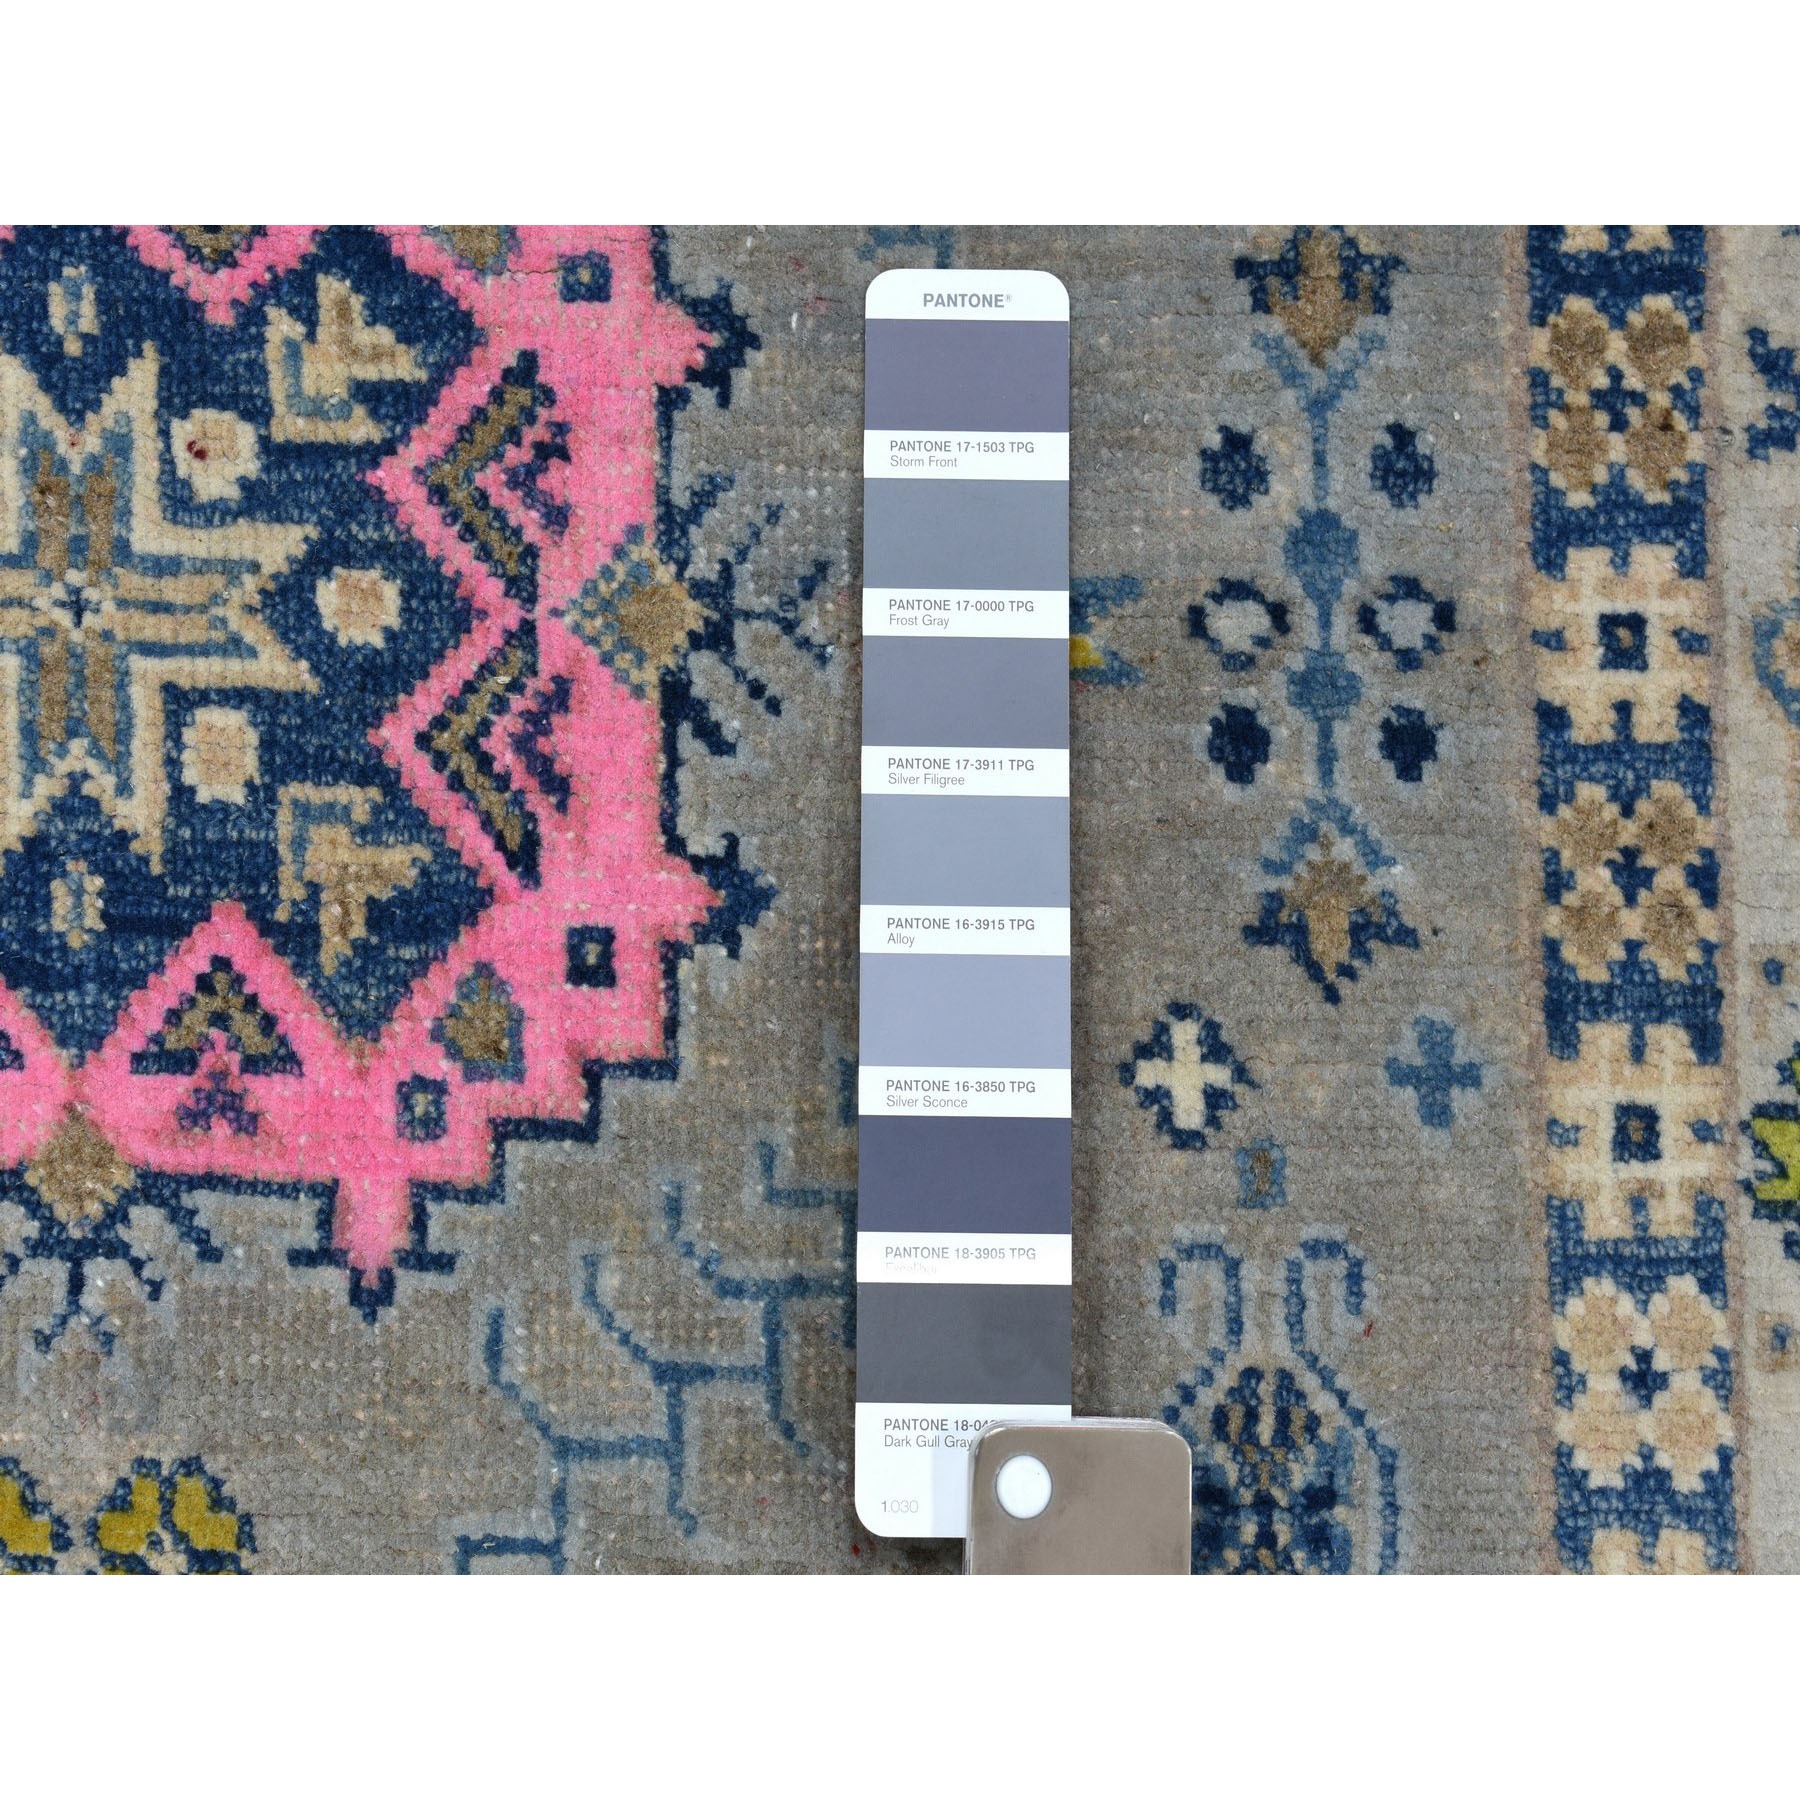 3-3 x5- Colorful Gray Fusion Kazak Pure Wool Geometric Design Hand Knotted Oriental Rug 